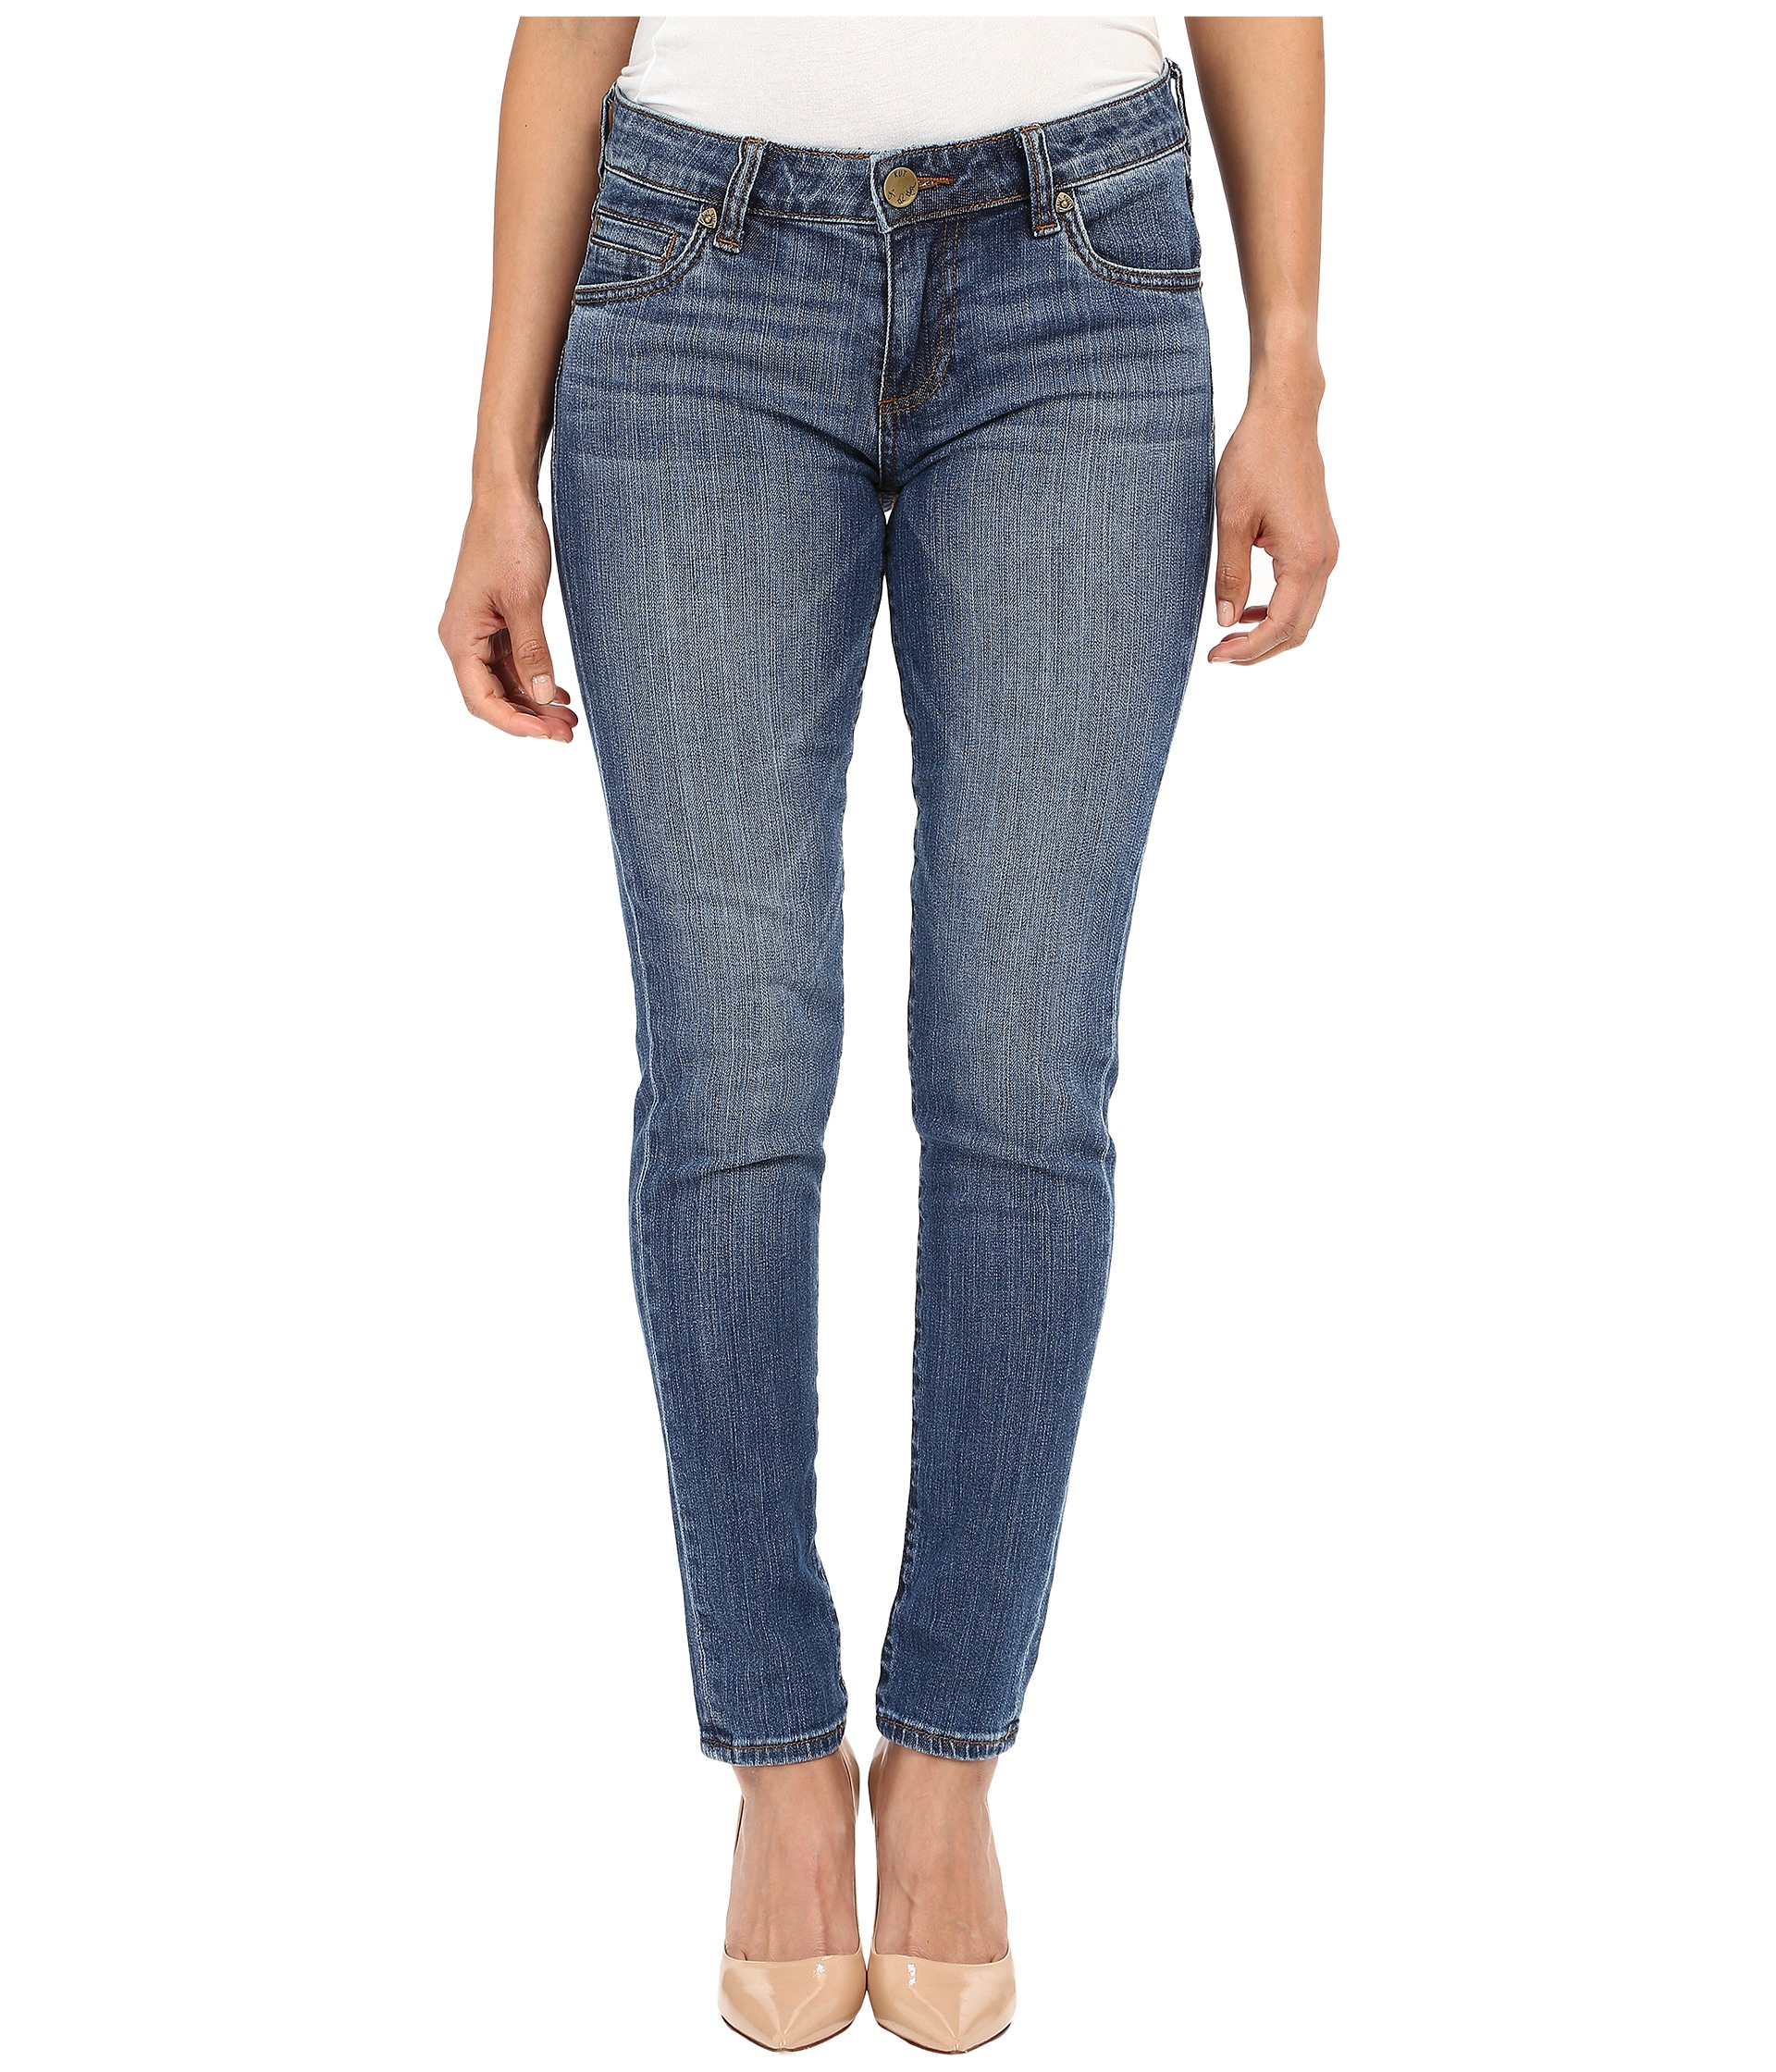 Kut from the kloth Petite Diana Skinny Jeans In Kindle in Blue (Opulent ...